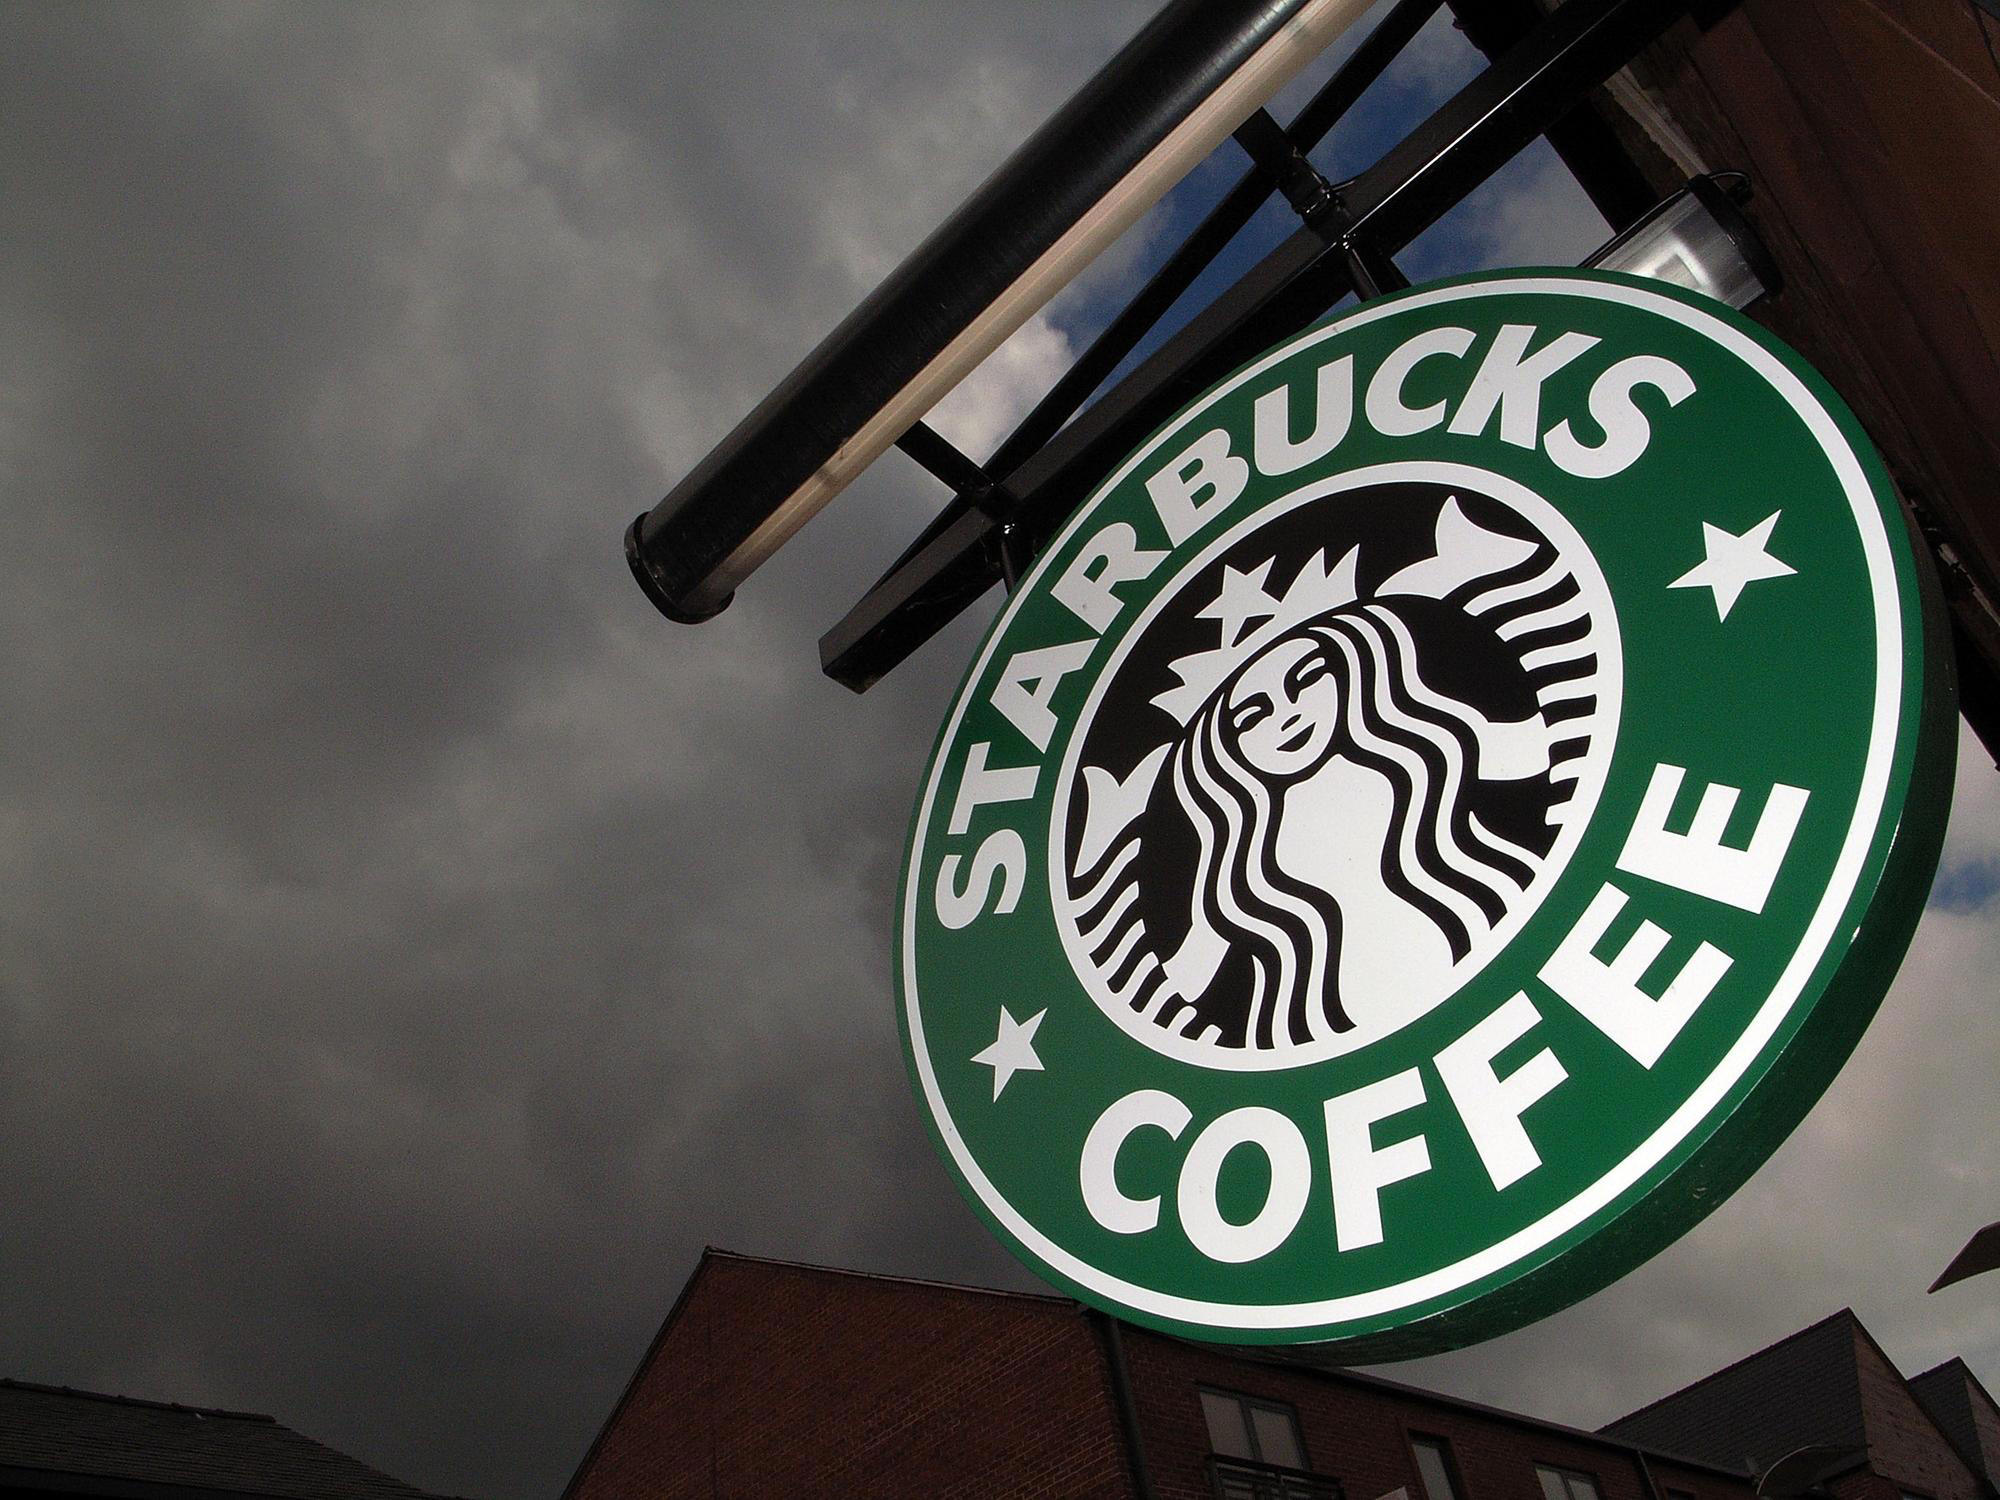 Starbucks to offer free coffee to NHS workers to say 'thank you' this